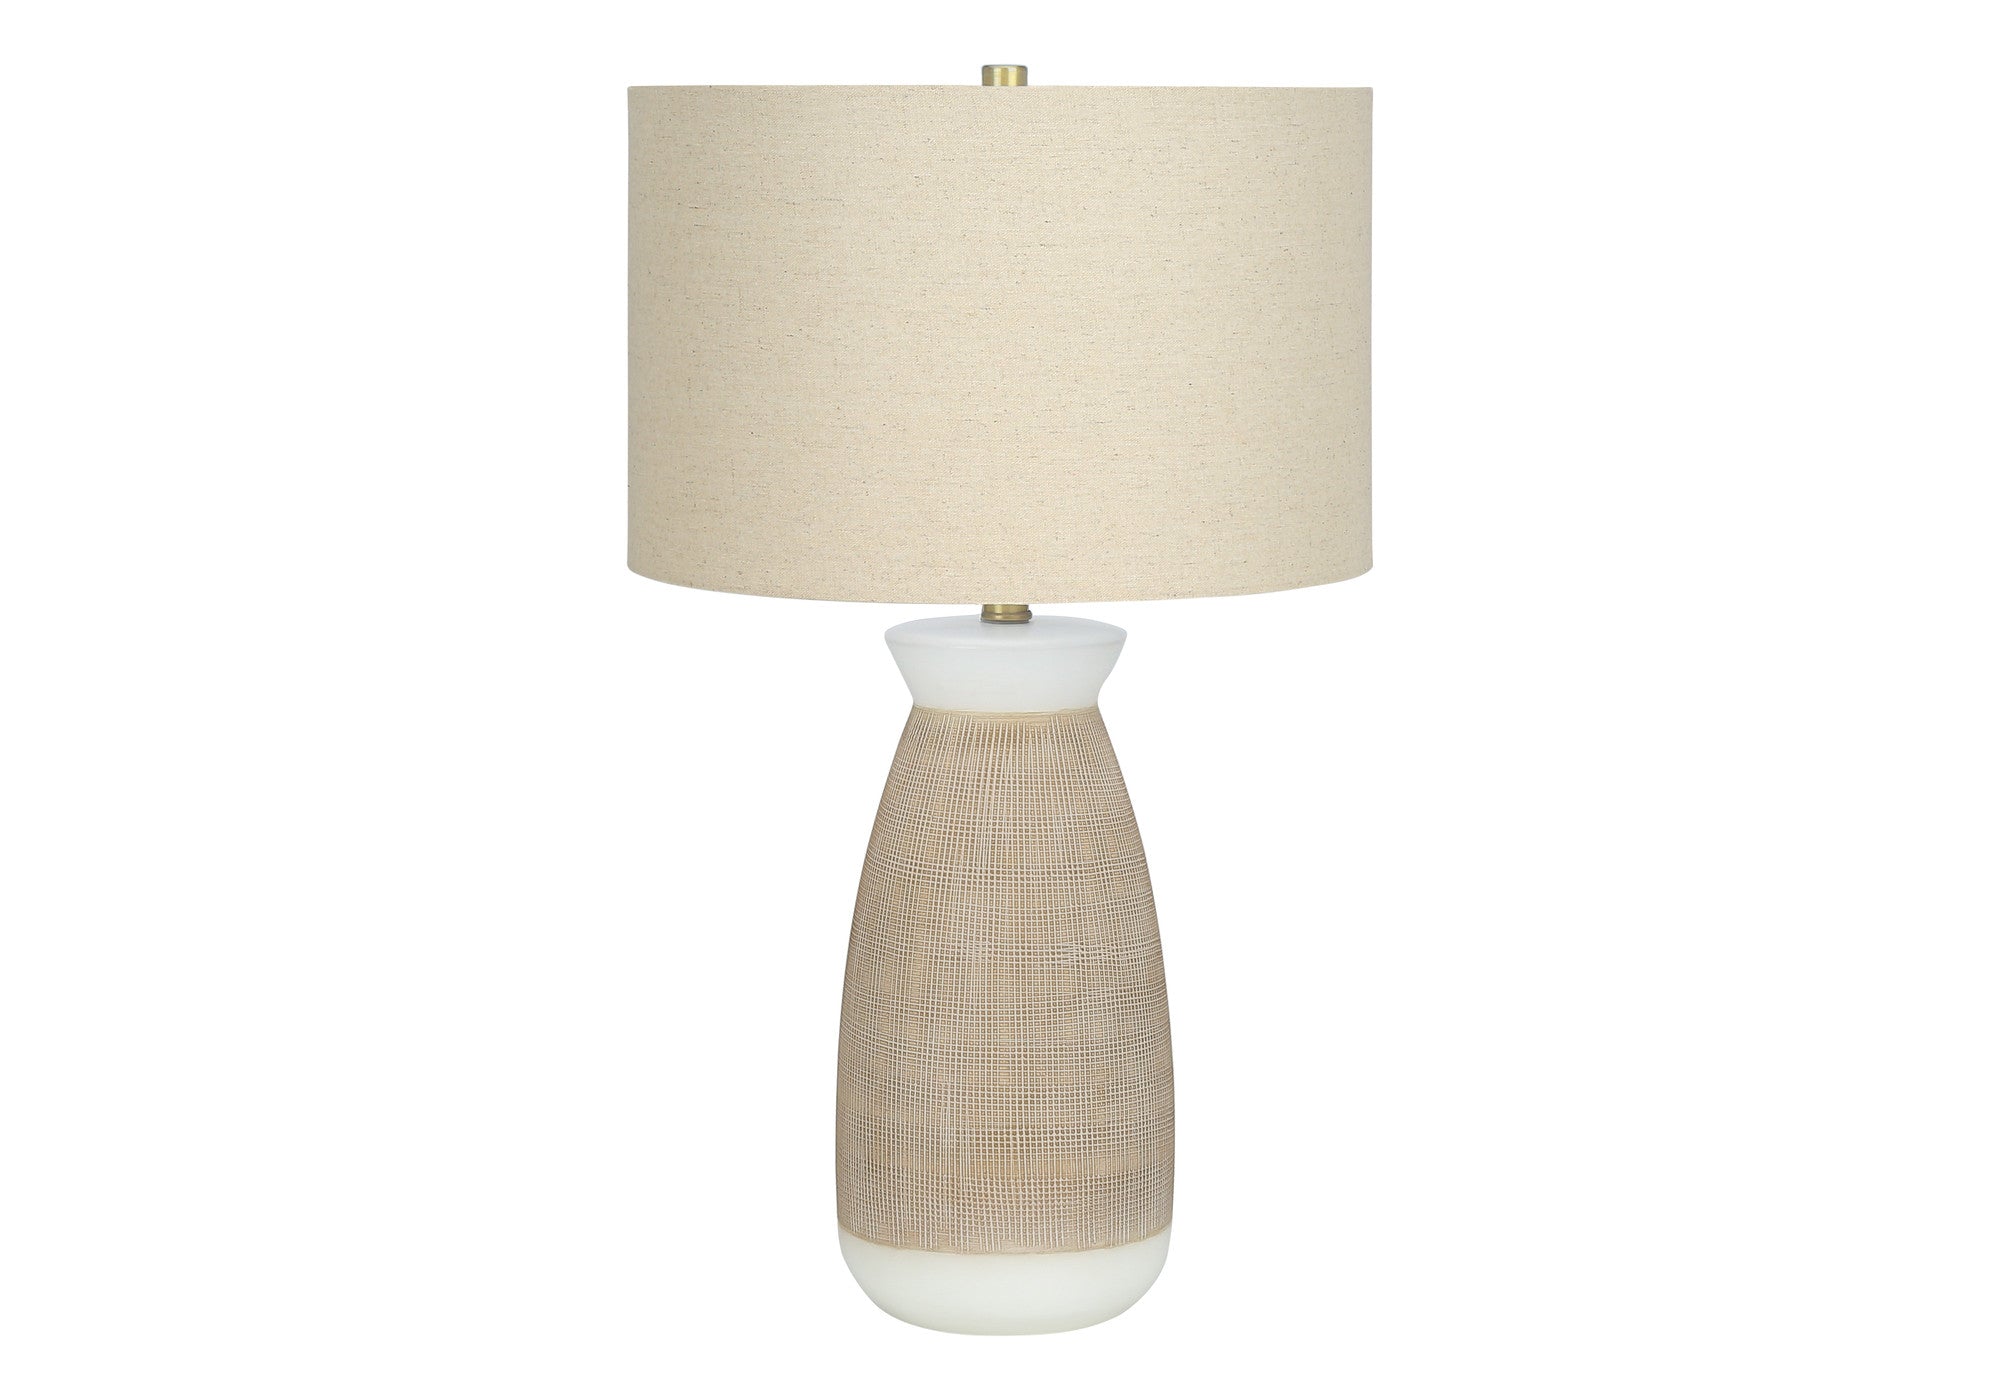 27" Brown and White Ceramic Round Table Lamp With Beige Drum Shade